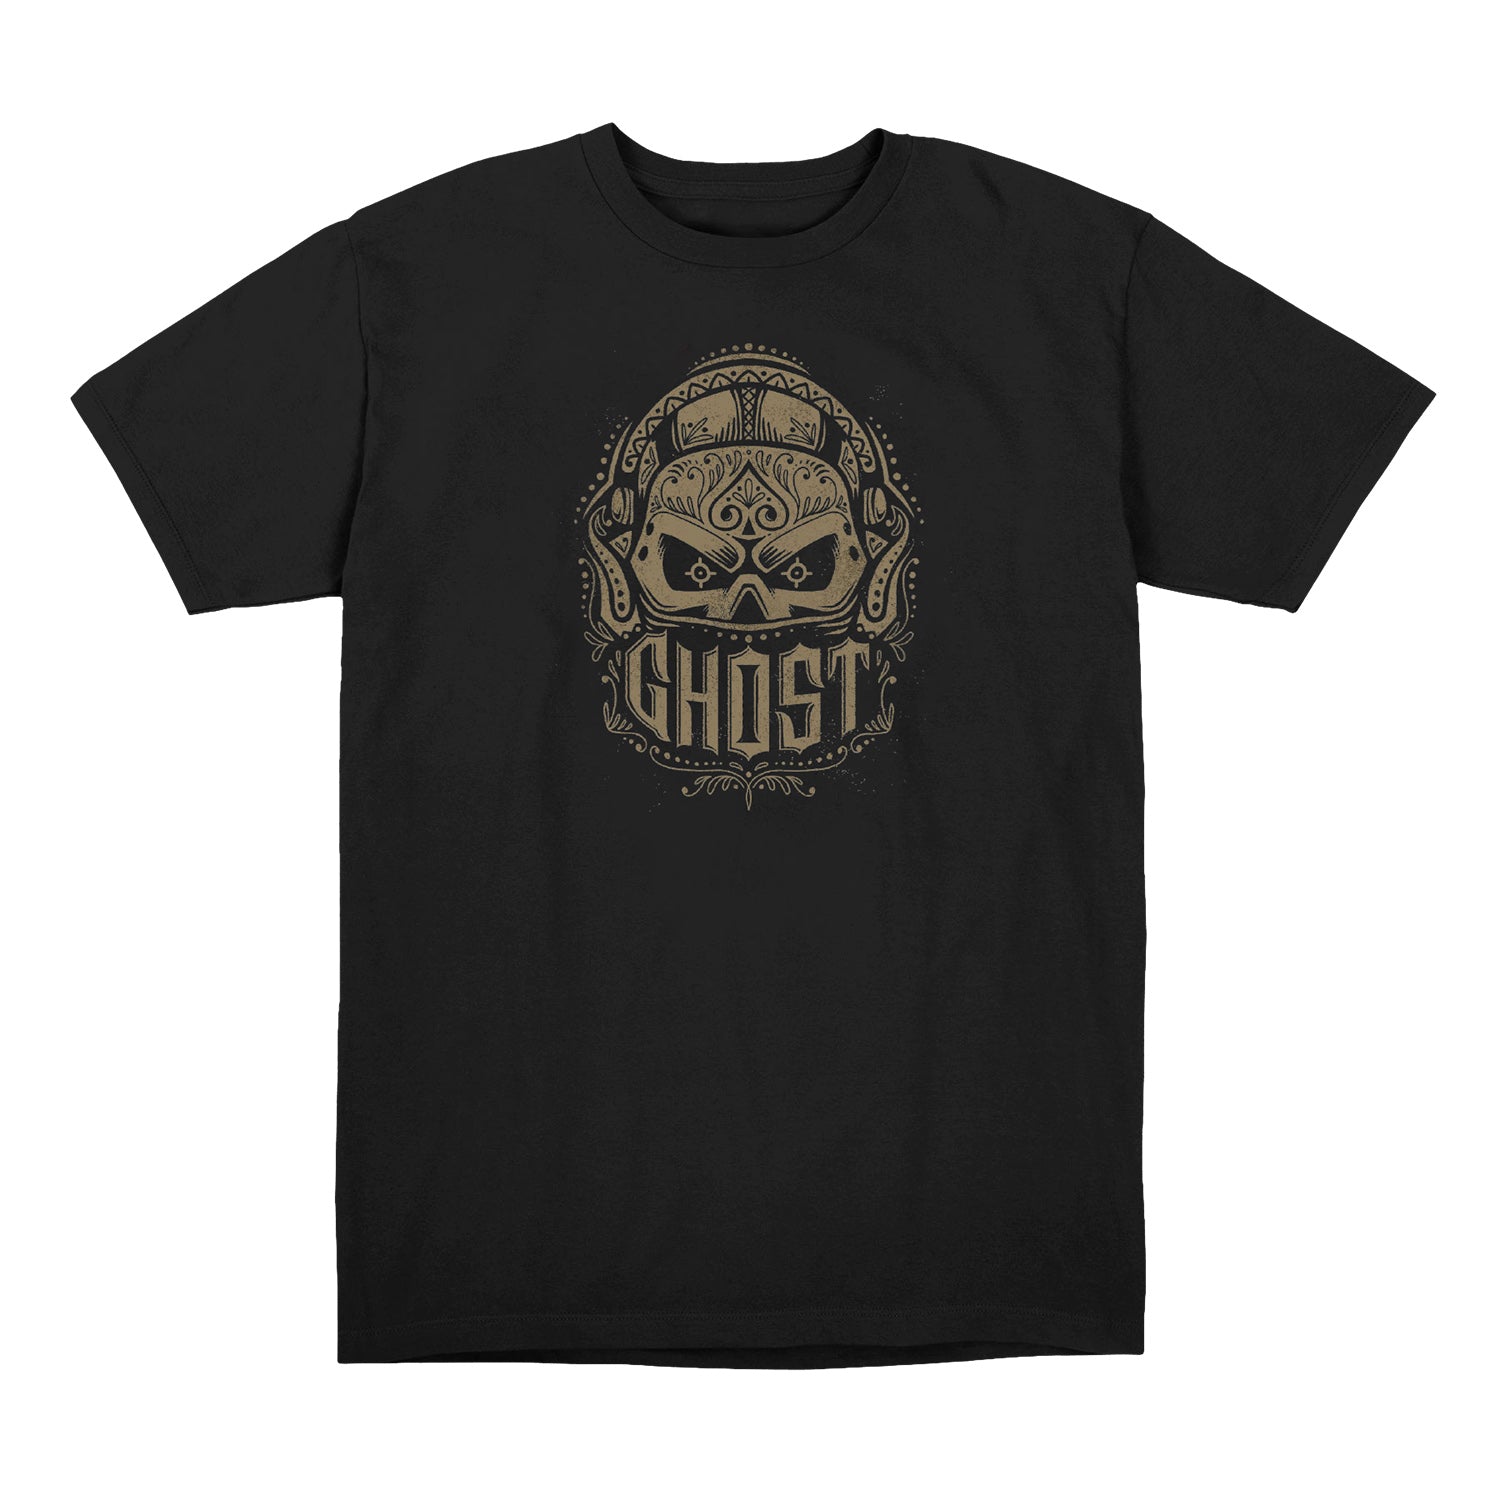 Call of Duty Black Ghost Skull Mask T-Shirt - Front View with Ghost Skull Design